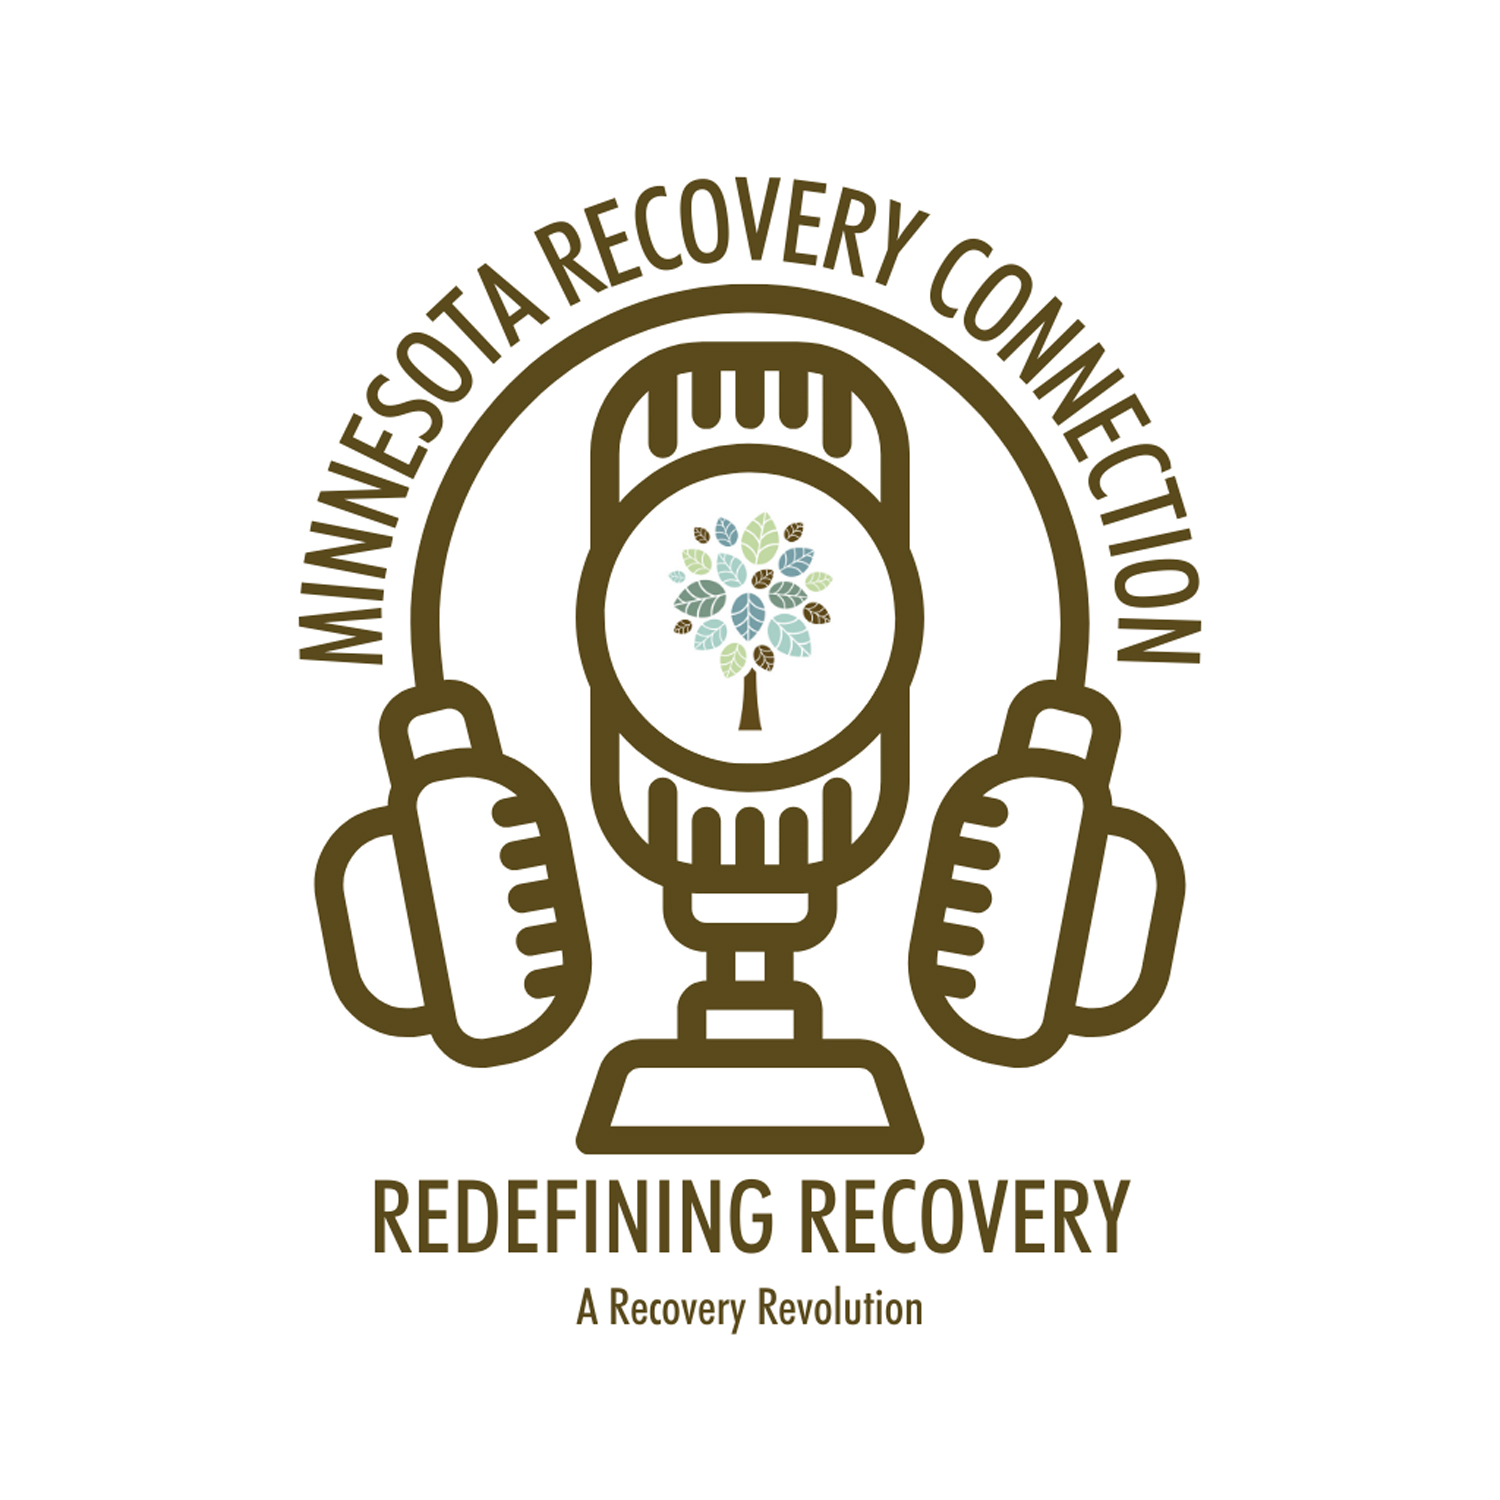 Redefining Recovery: A Recovery Revolution